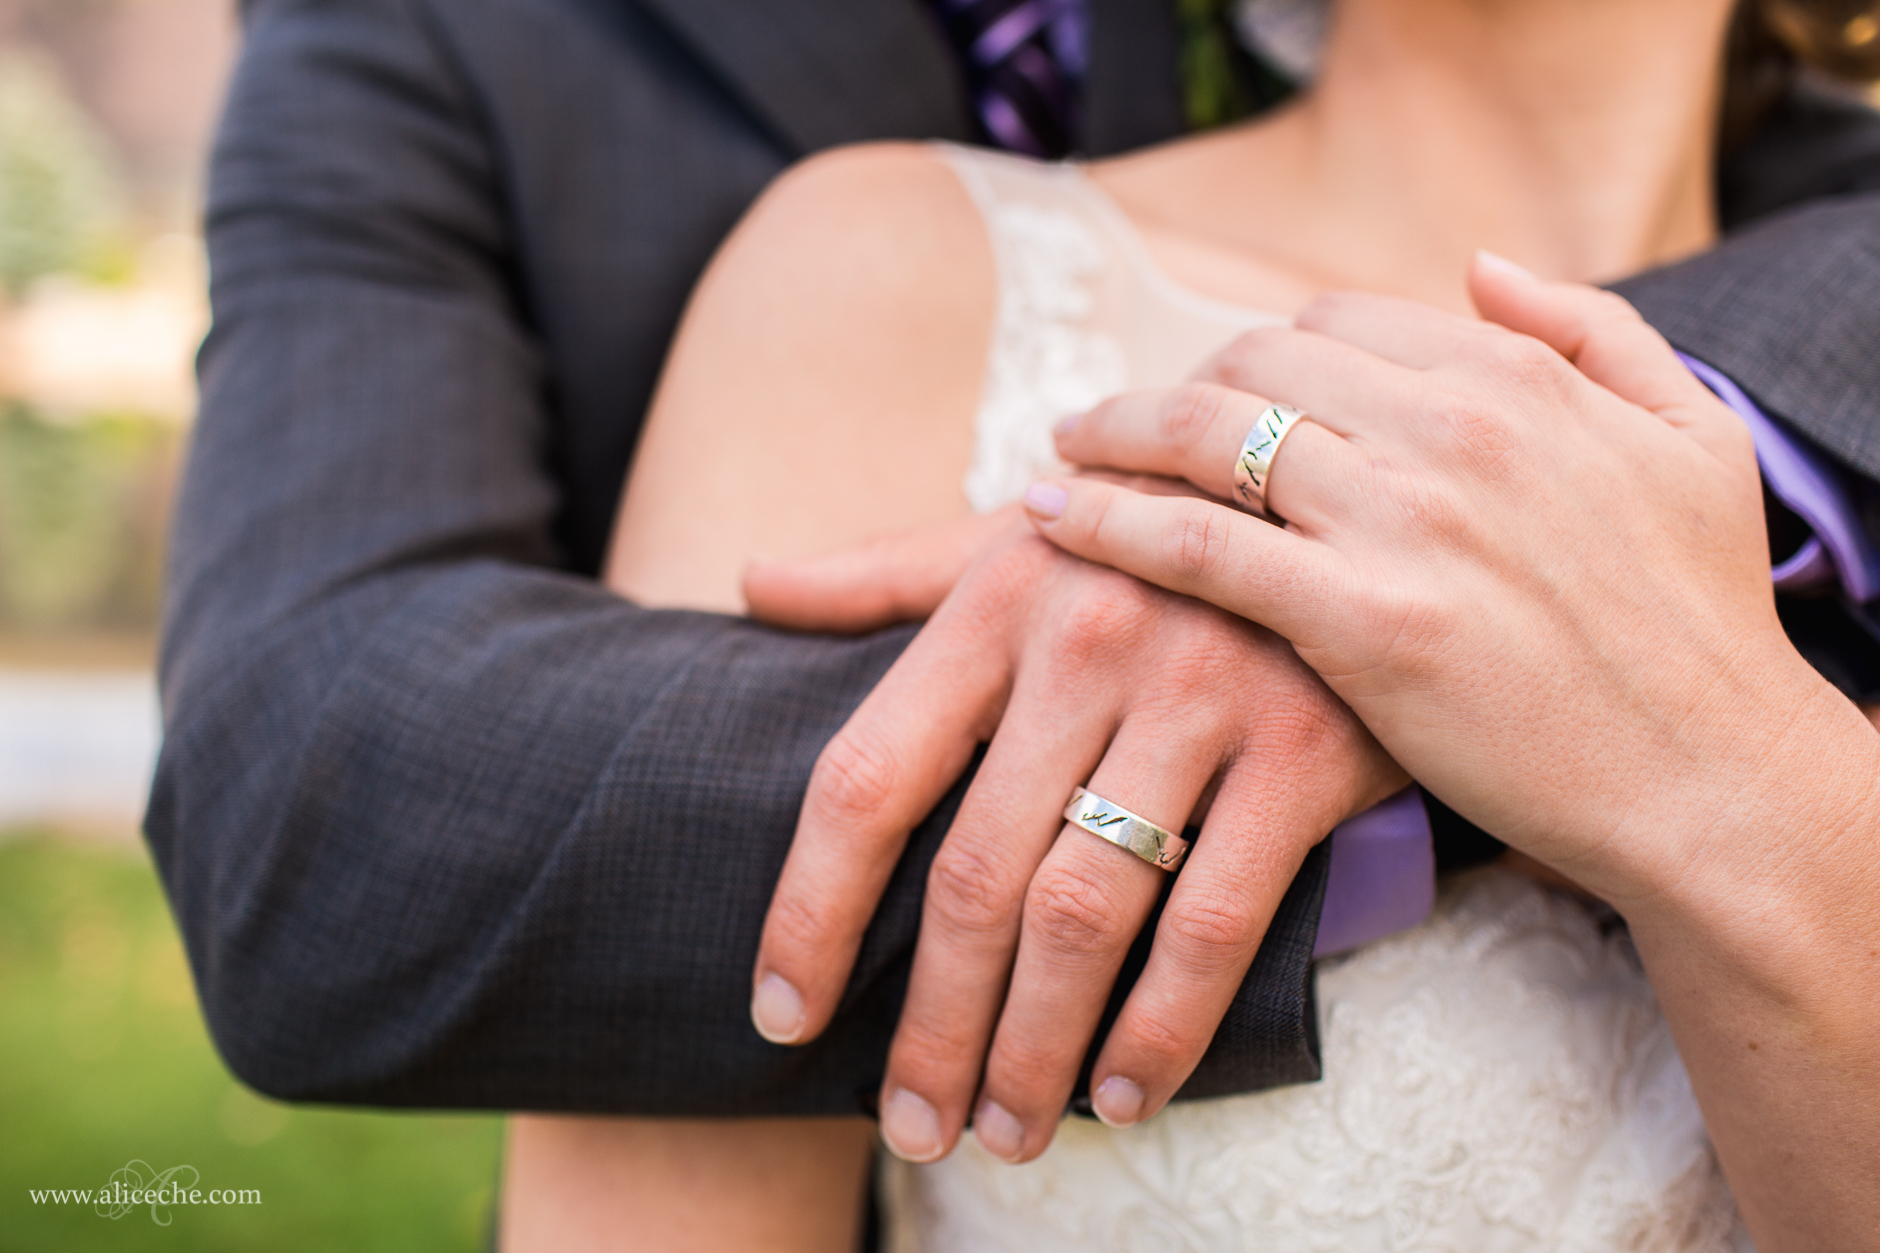 eagle-vail-wedding-san-francisco-bay-area-photographer-alice-che-hands-rings-intimate